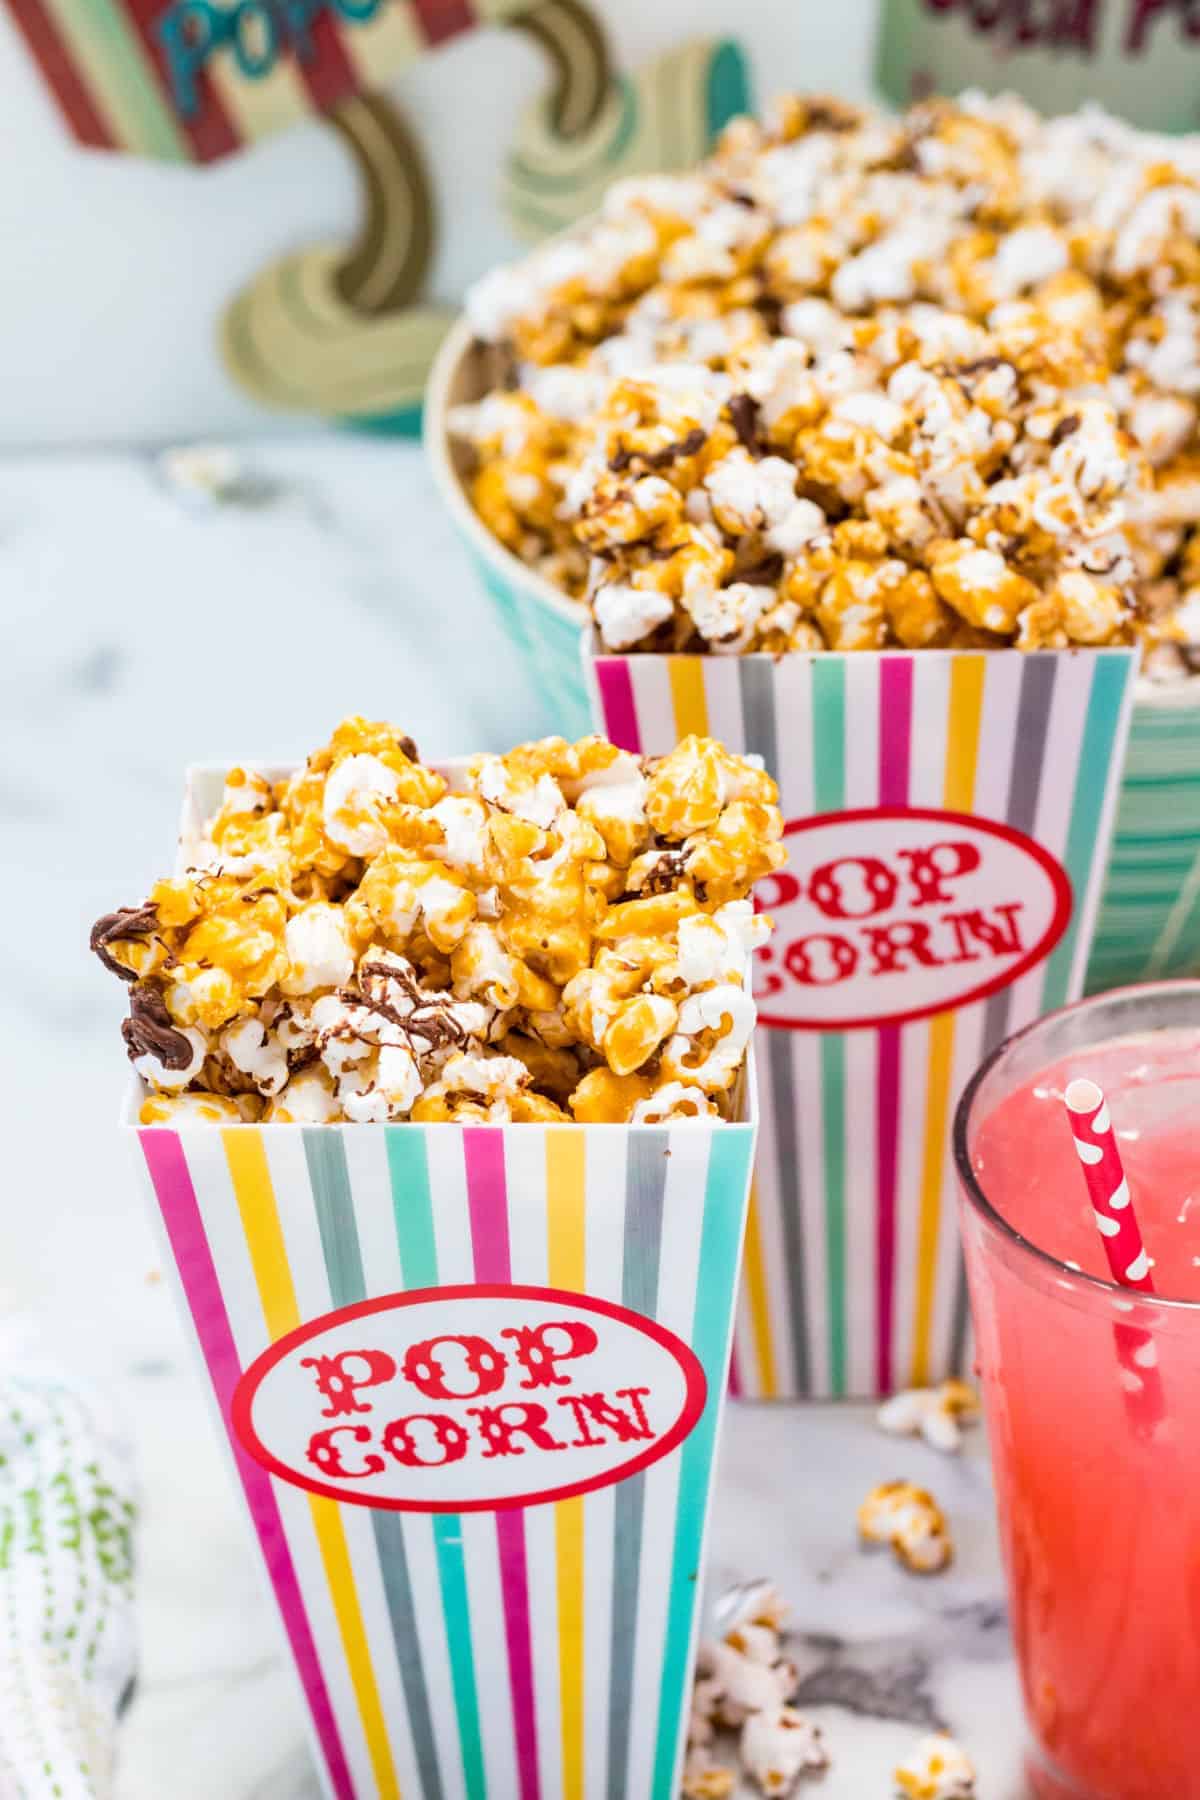 Easy Toffee Chocolate Covered Popcorn